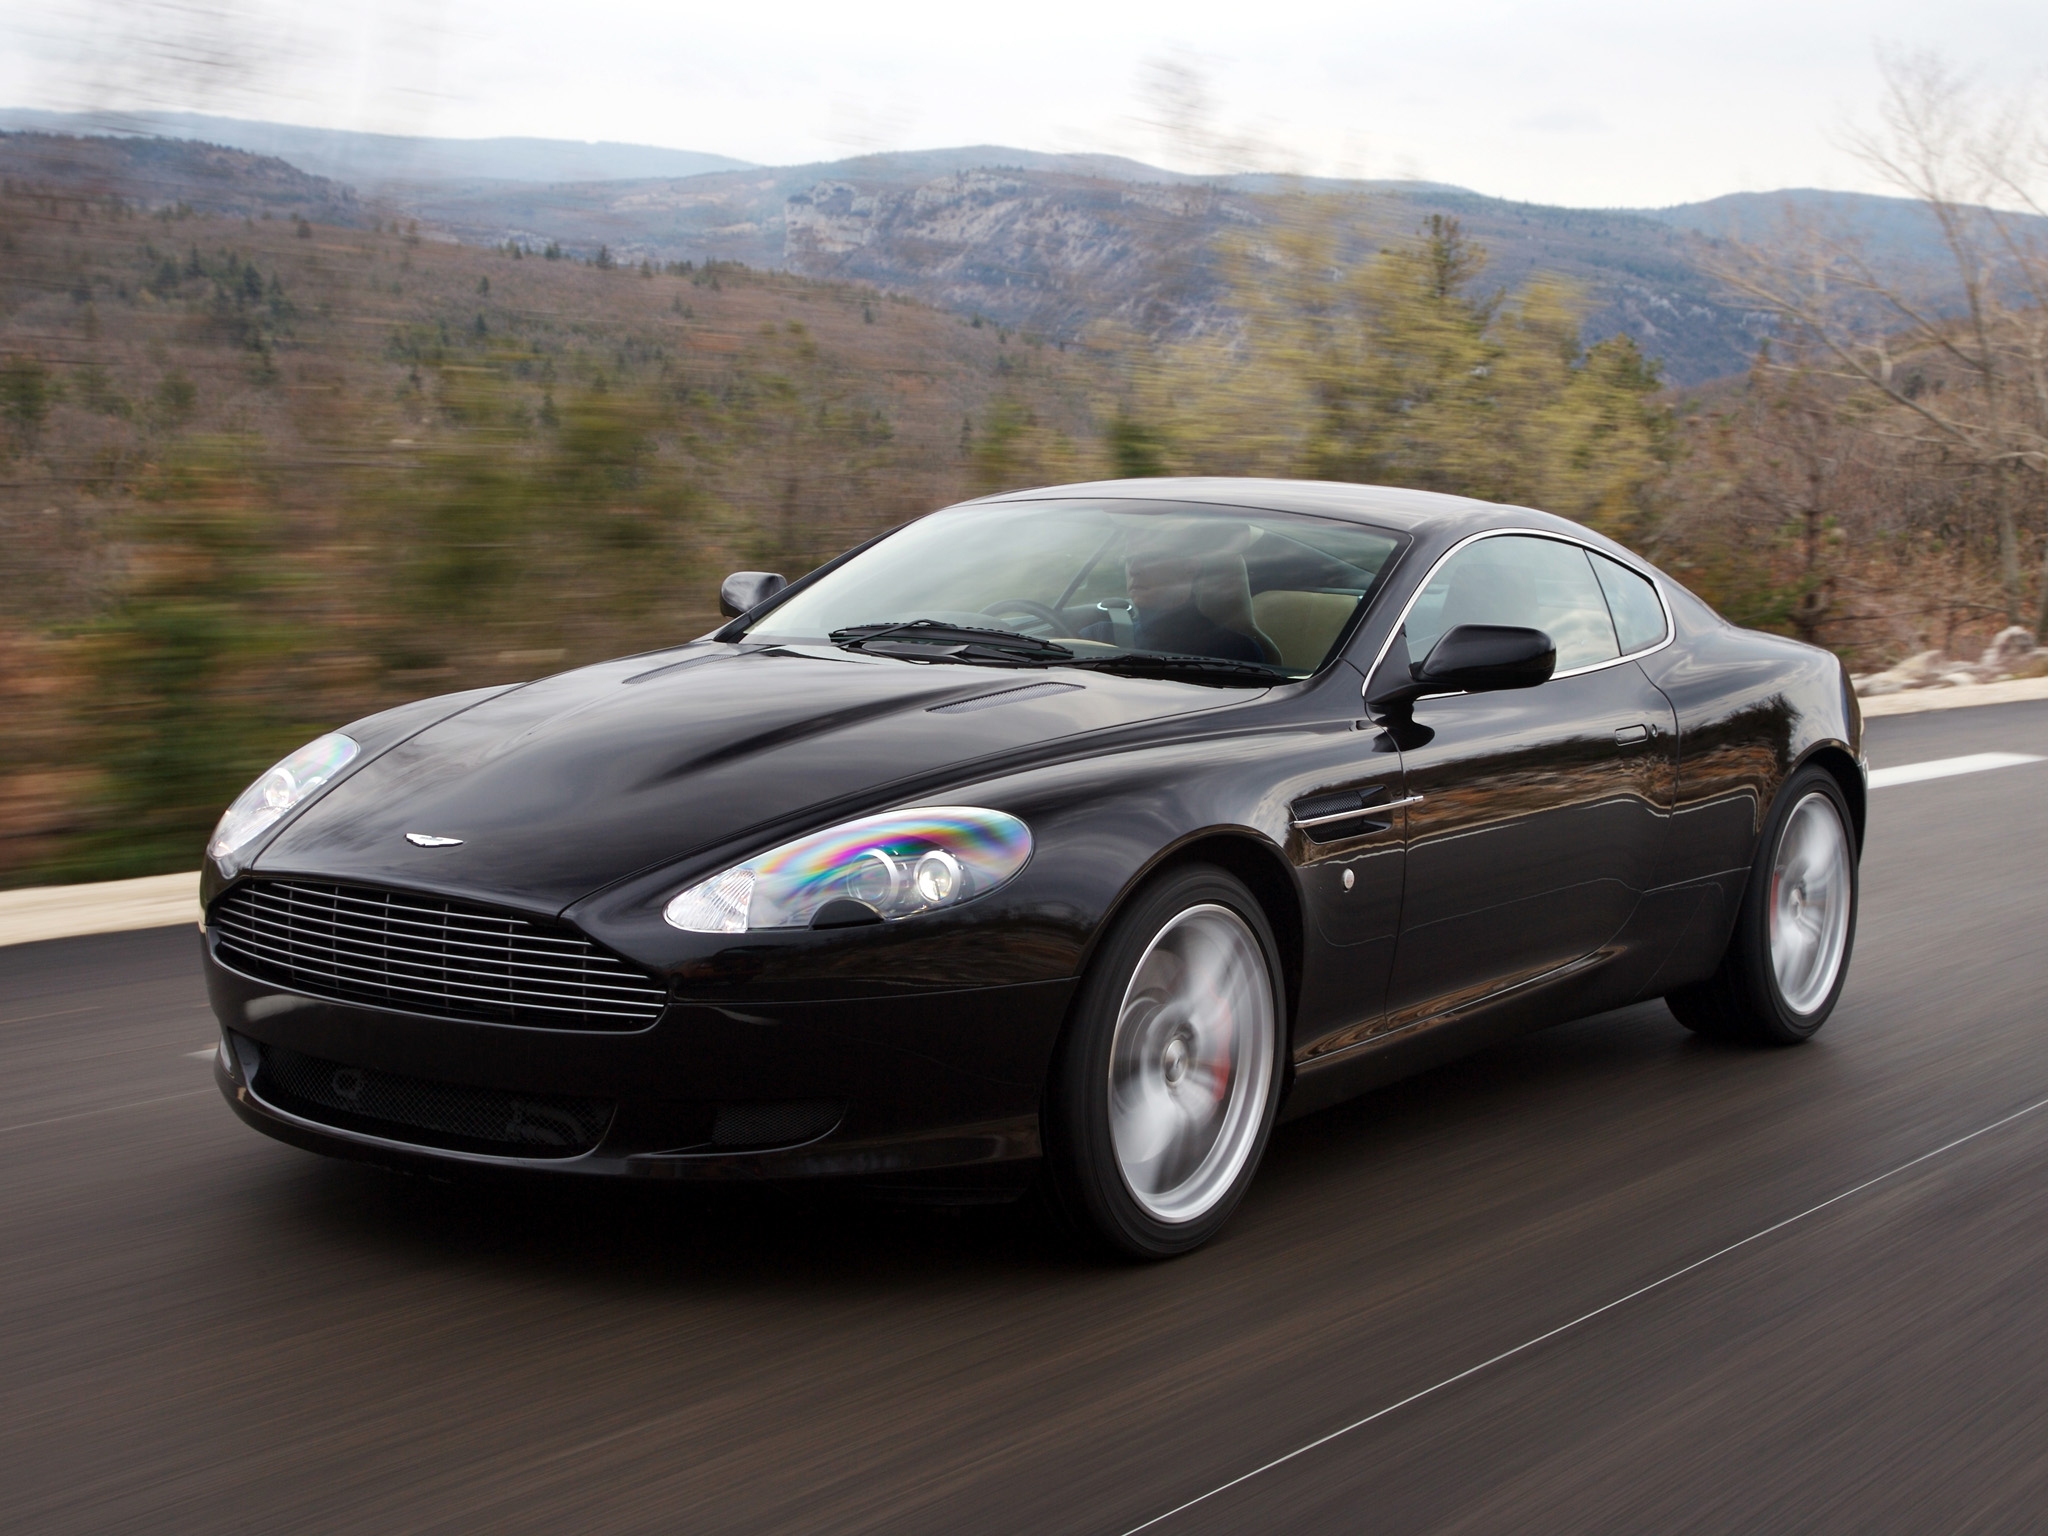 speed, 2006, sports, auto, nature, trees, mountains, aston martin, cars, black, asphalt, side view, style, db9 HD wallpaper